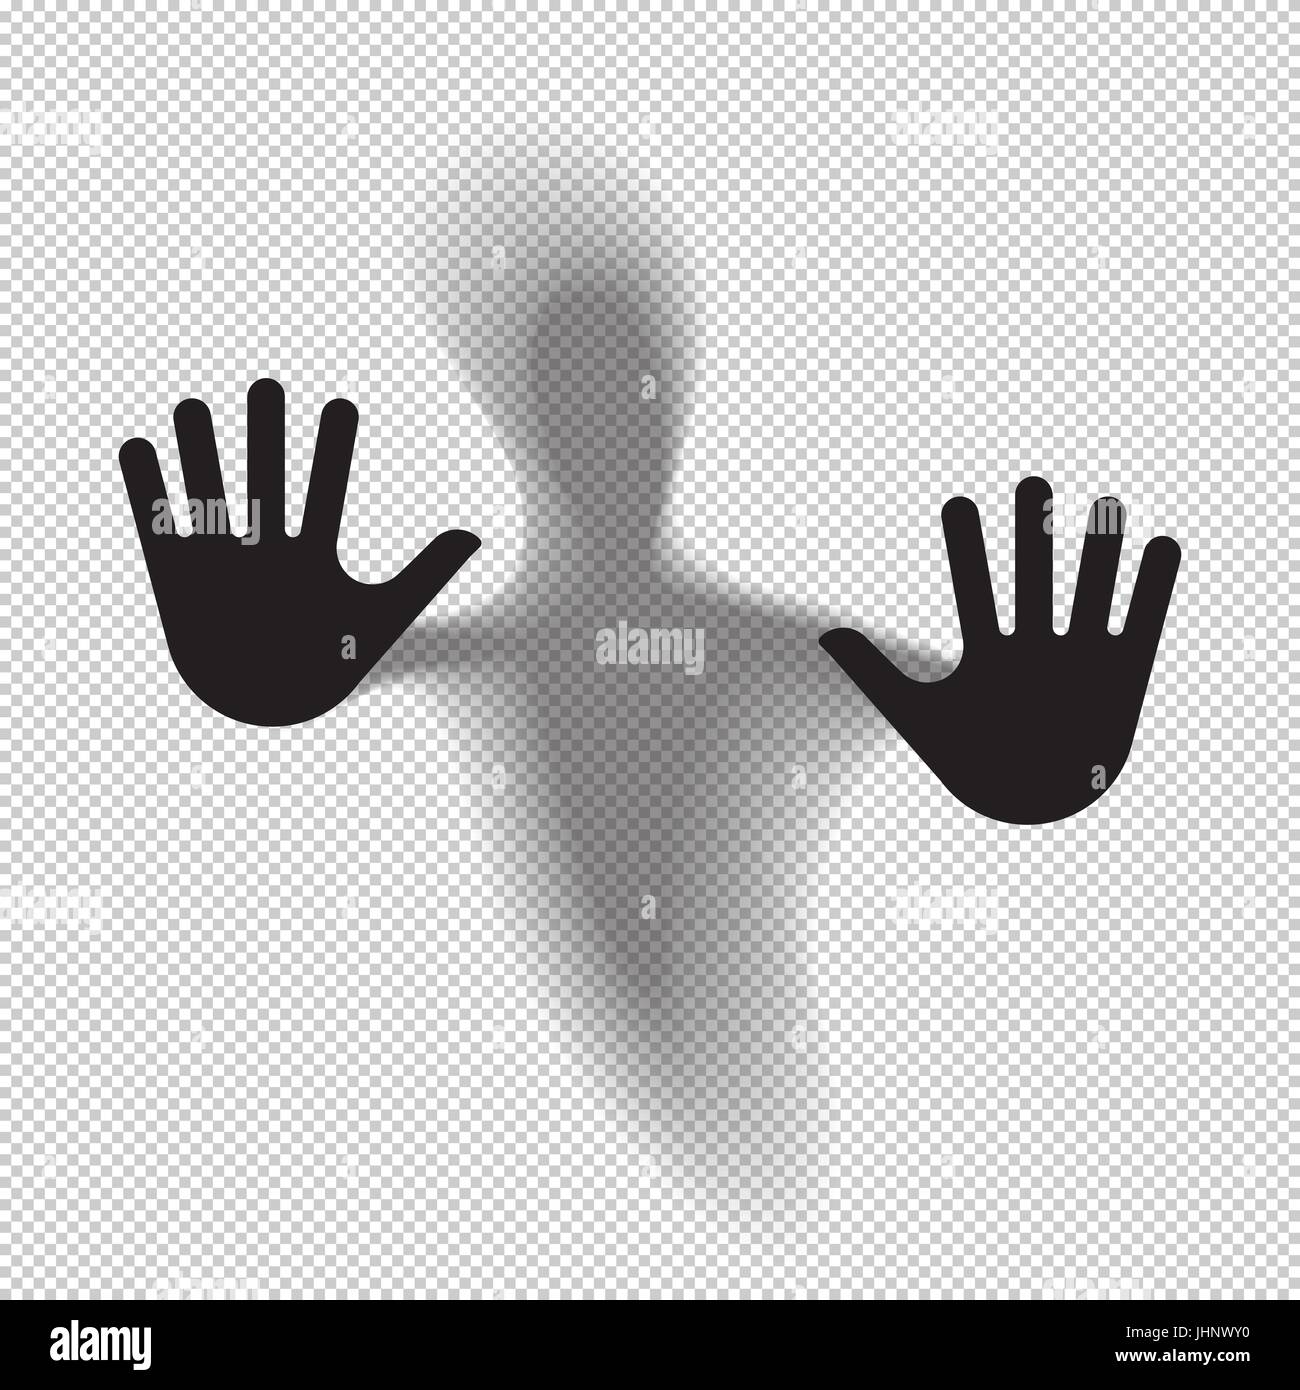 Shadowy figure behind glass translucent isolated. Vector illustration. Stock Vector